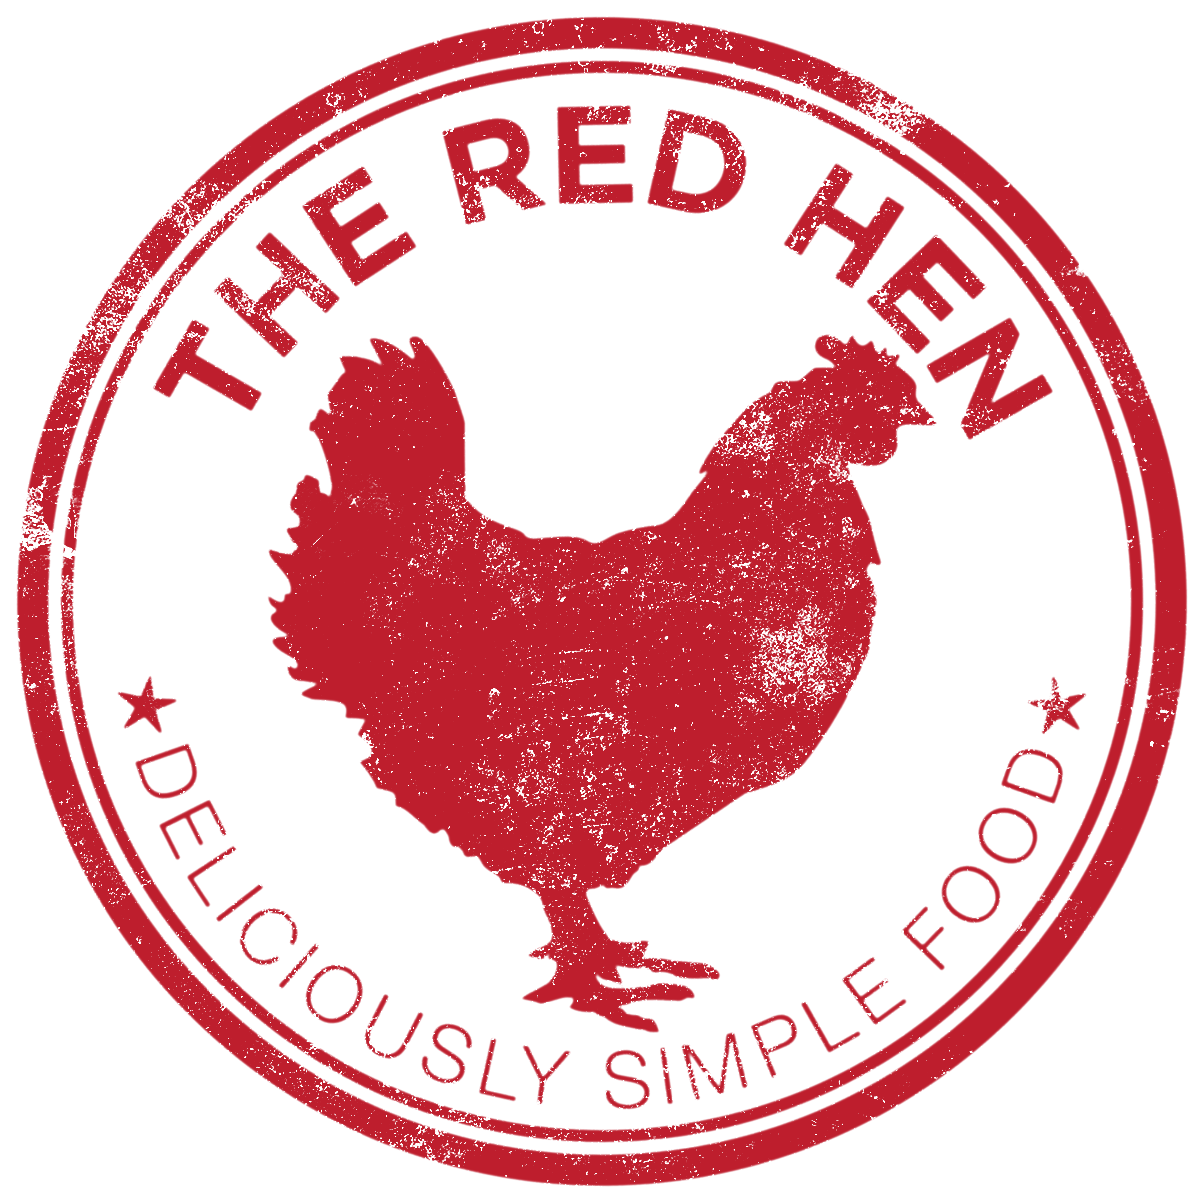 The Red Family Style Restaurant